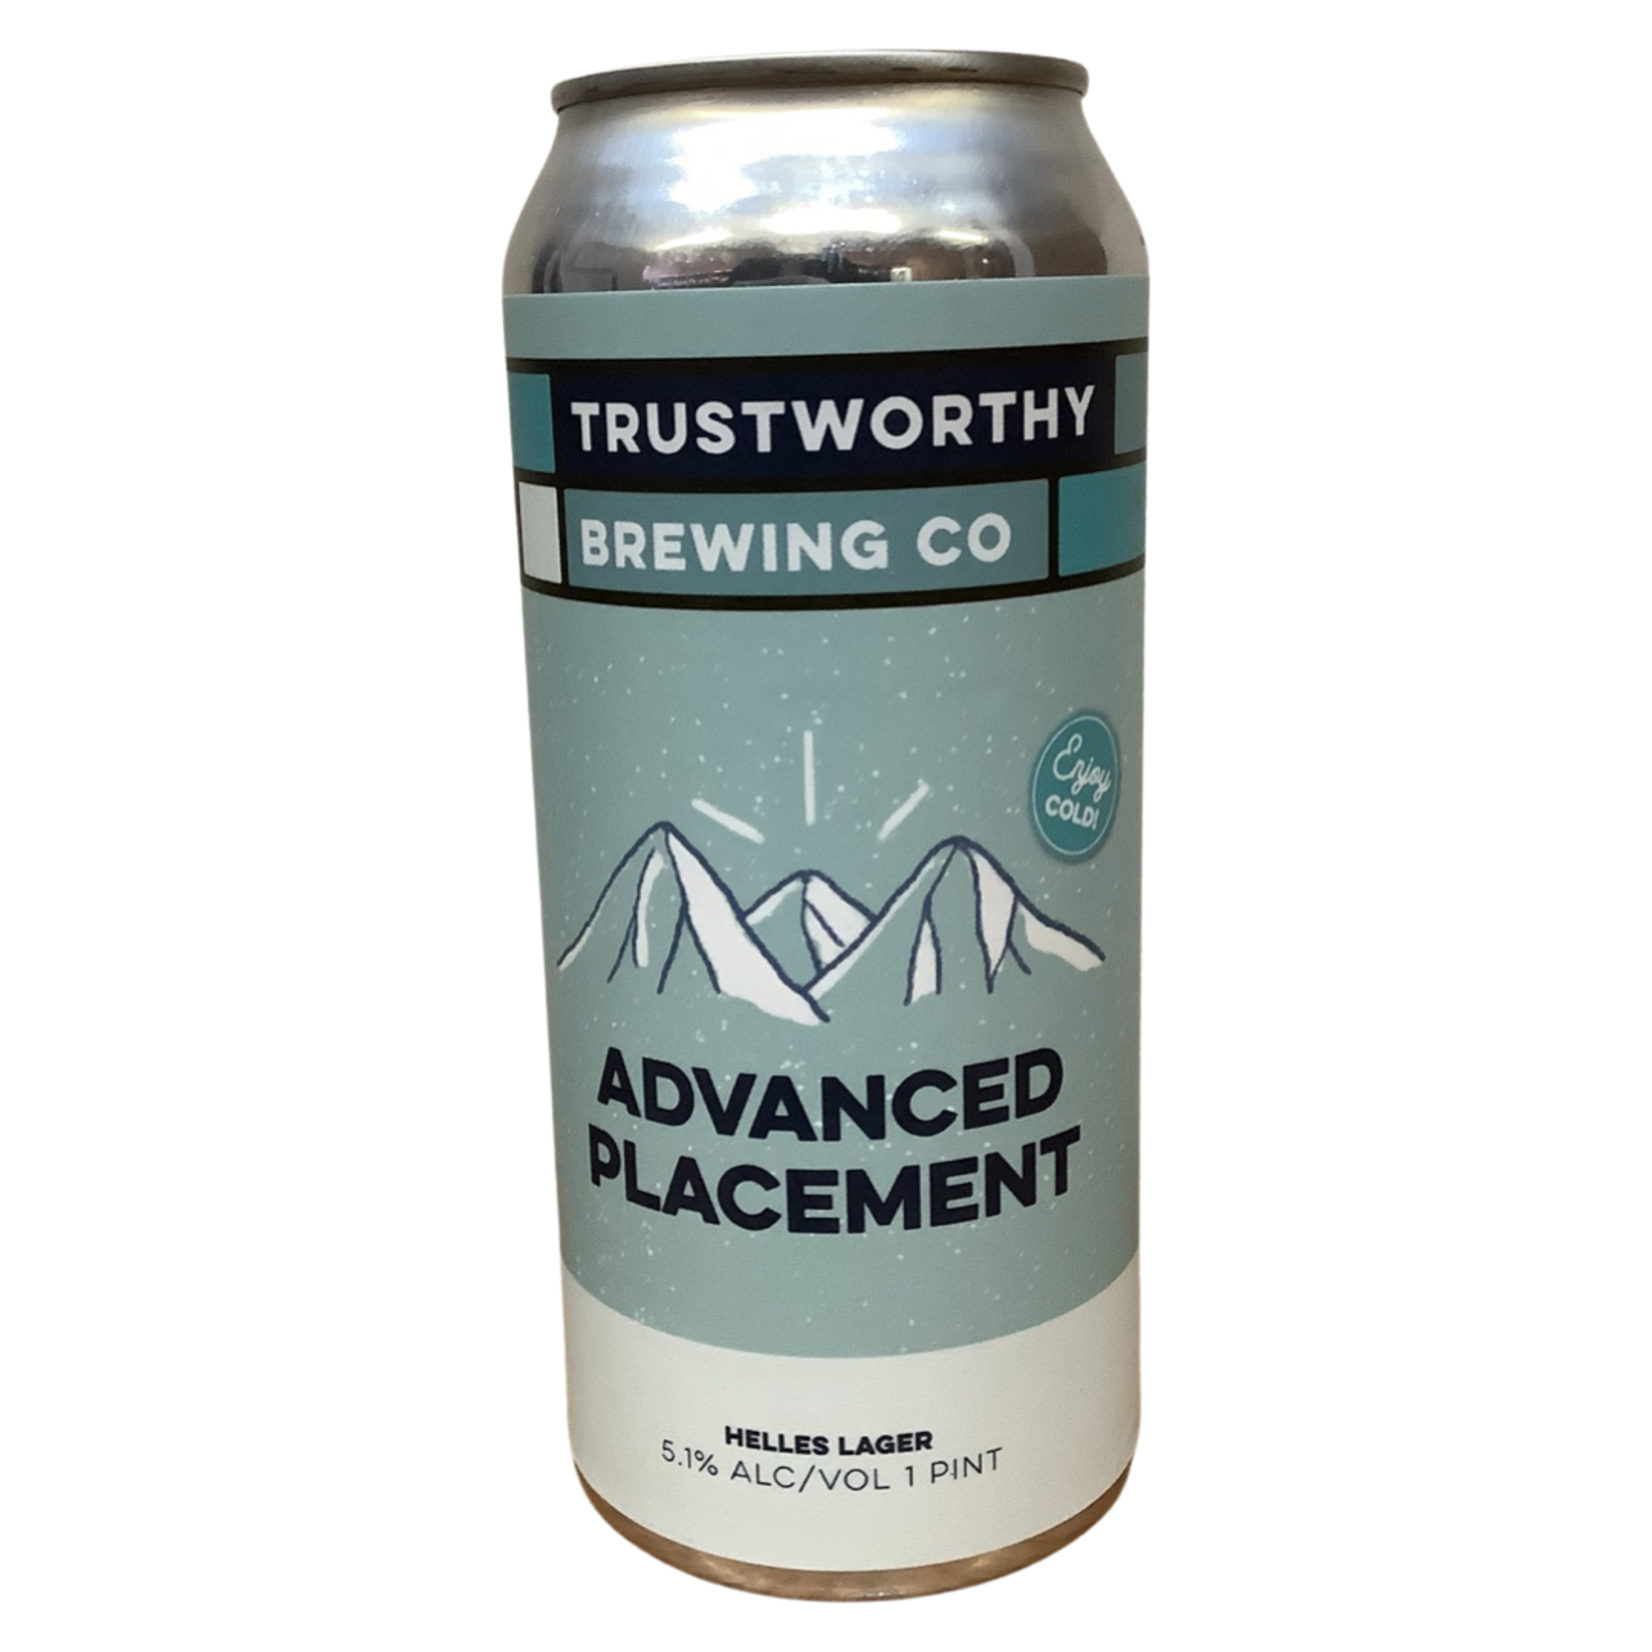 Trustworthy Brewing "Advanced Placement" Helles Lager 16 OZ, Burbank CA